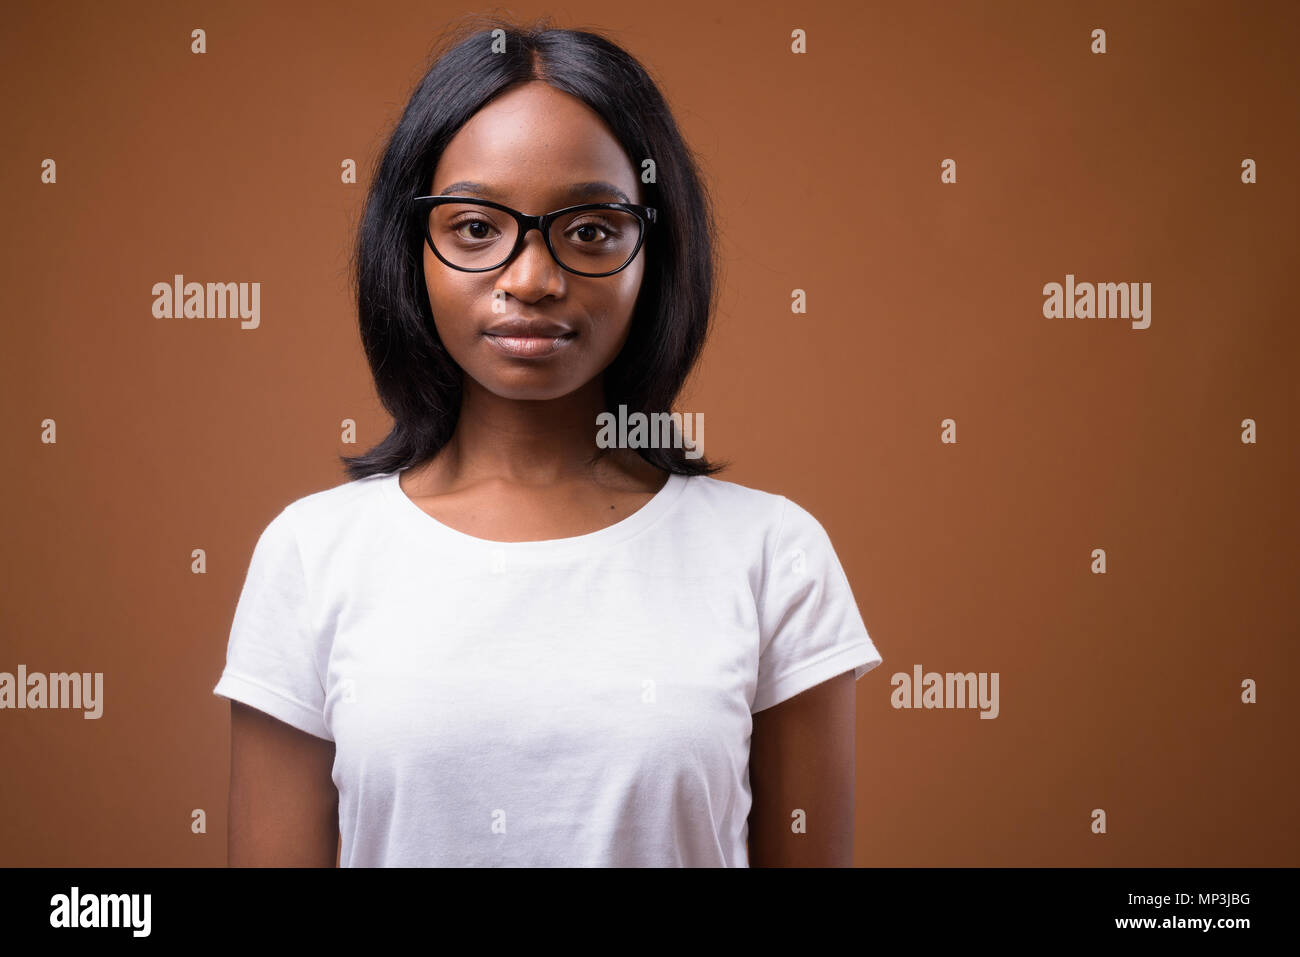 Young beautiful African Zulu woman against brown background Stock Photo